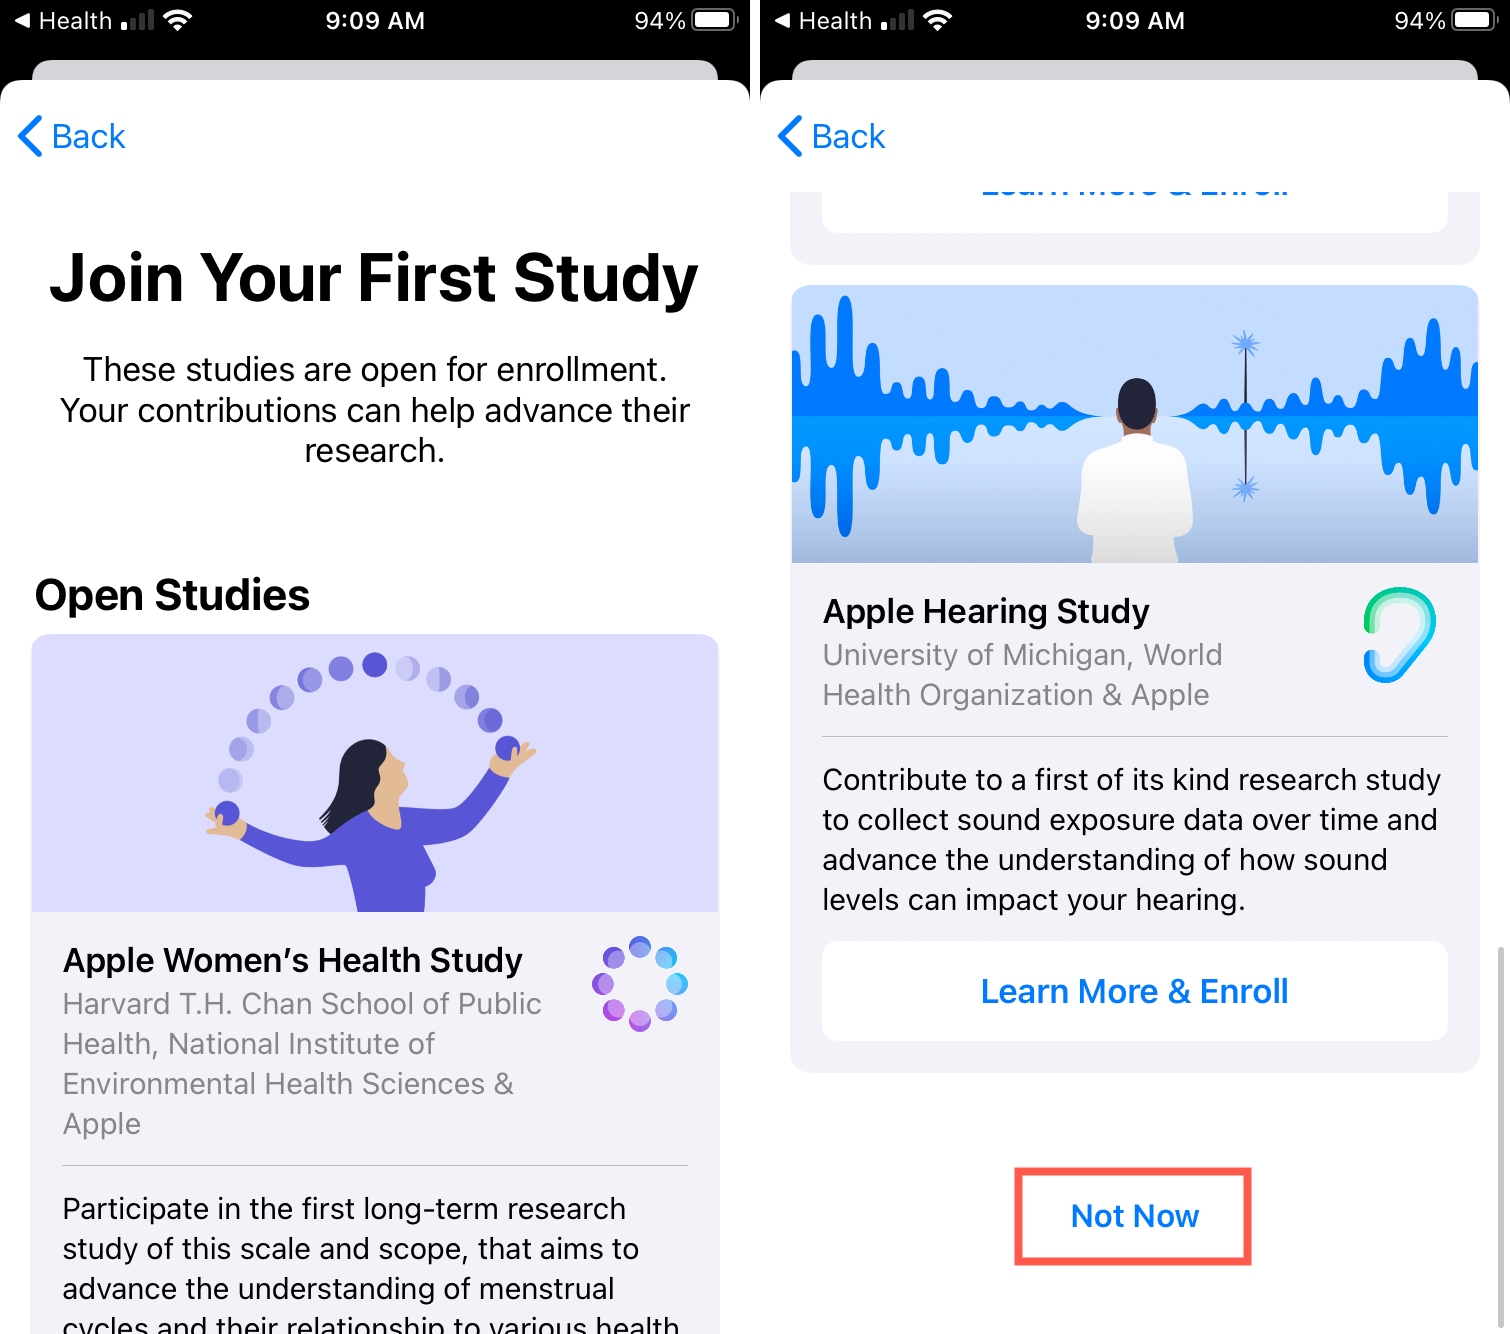 Join a Study Later by Tapping Not Now